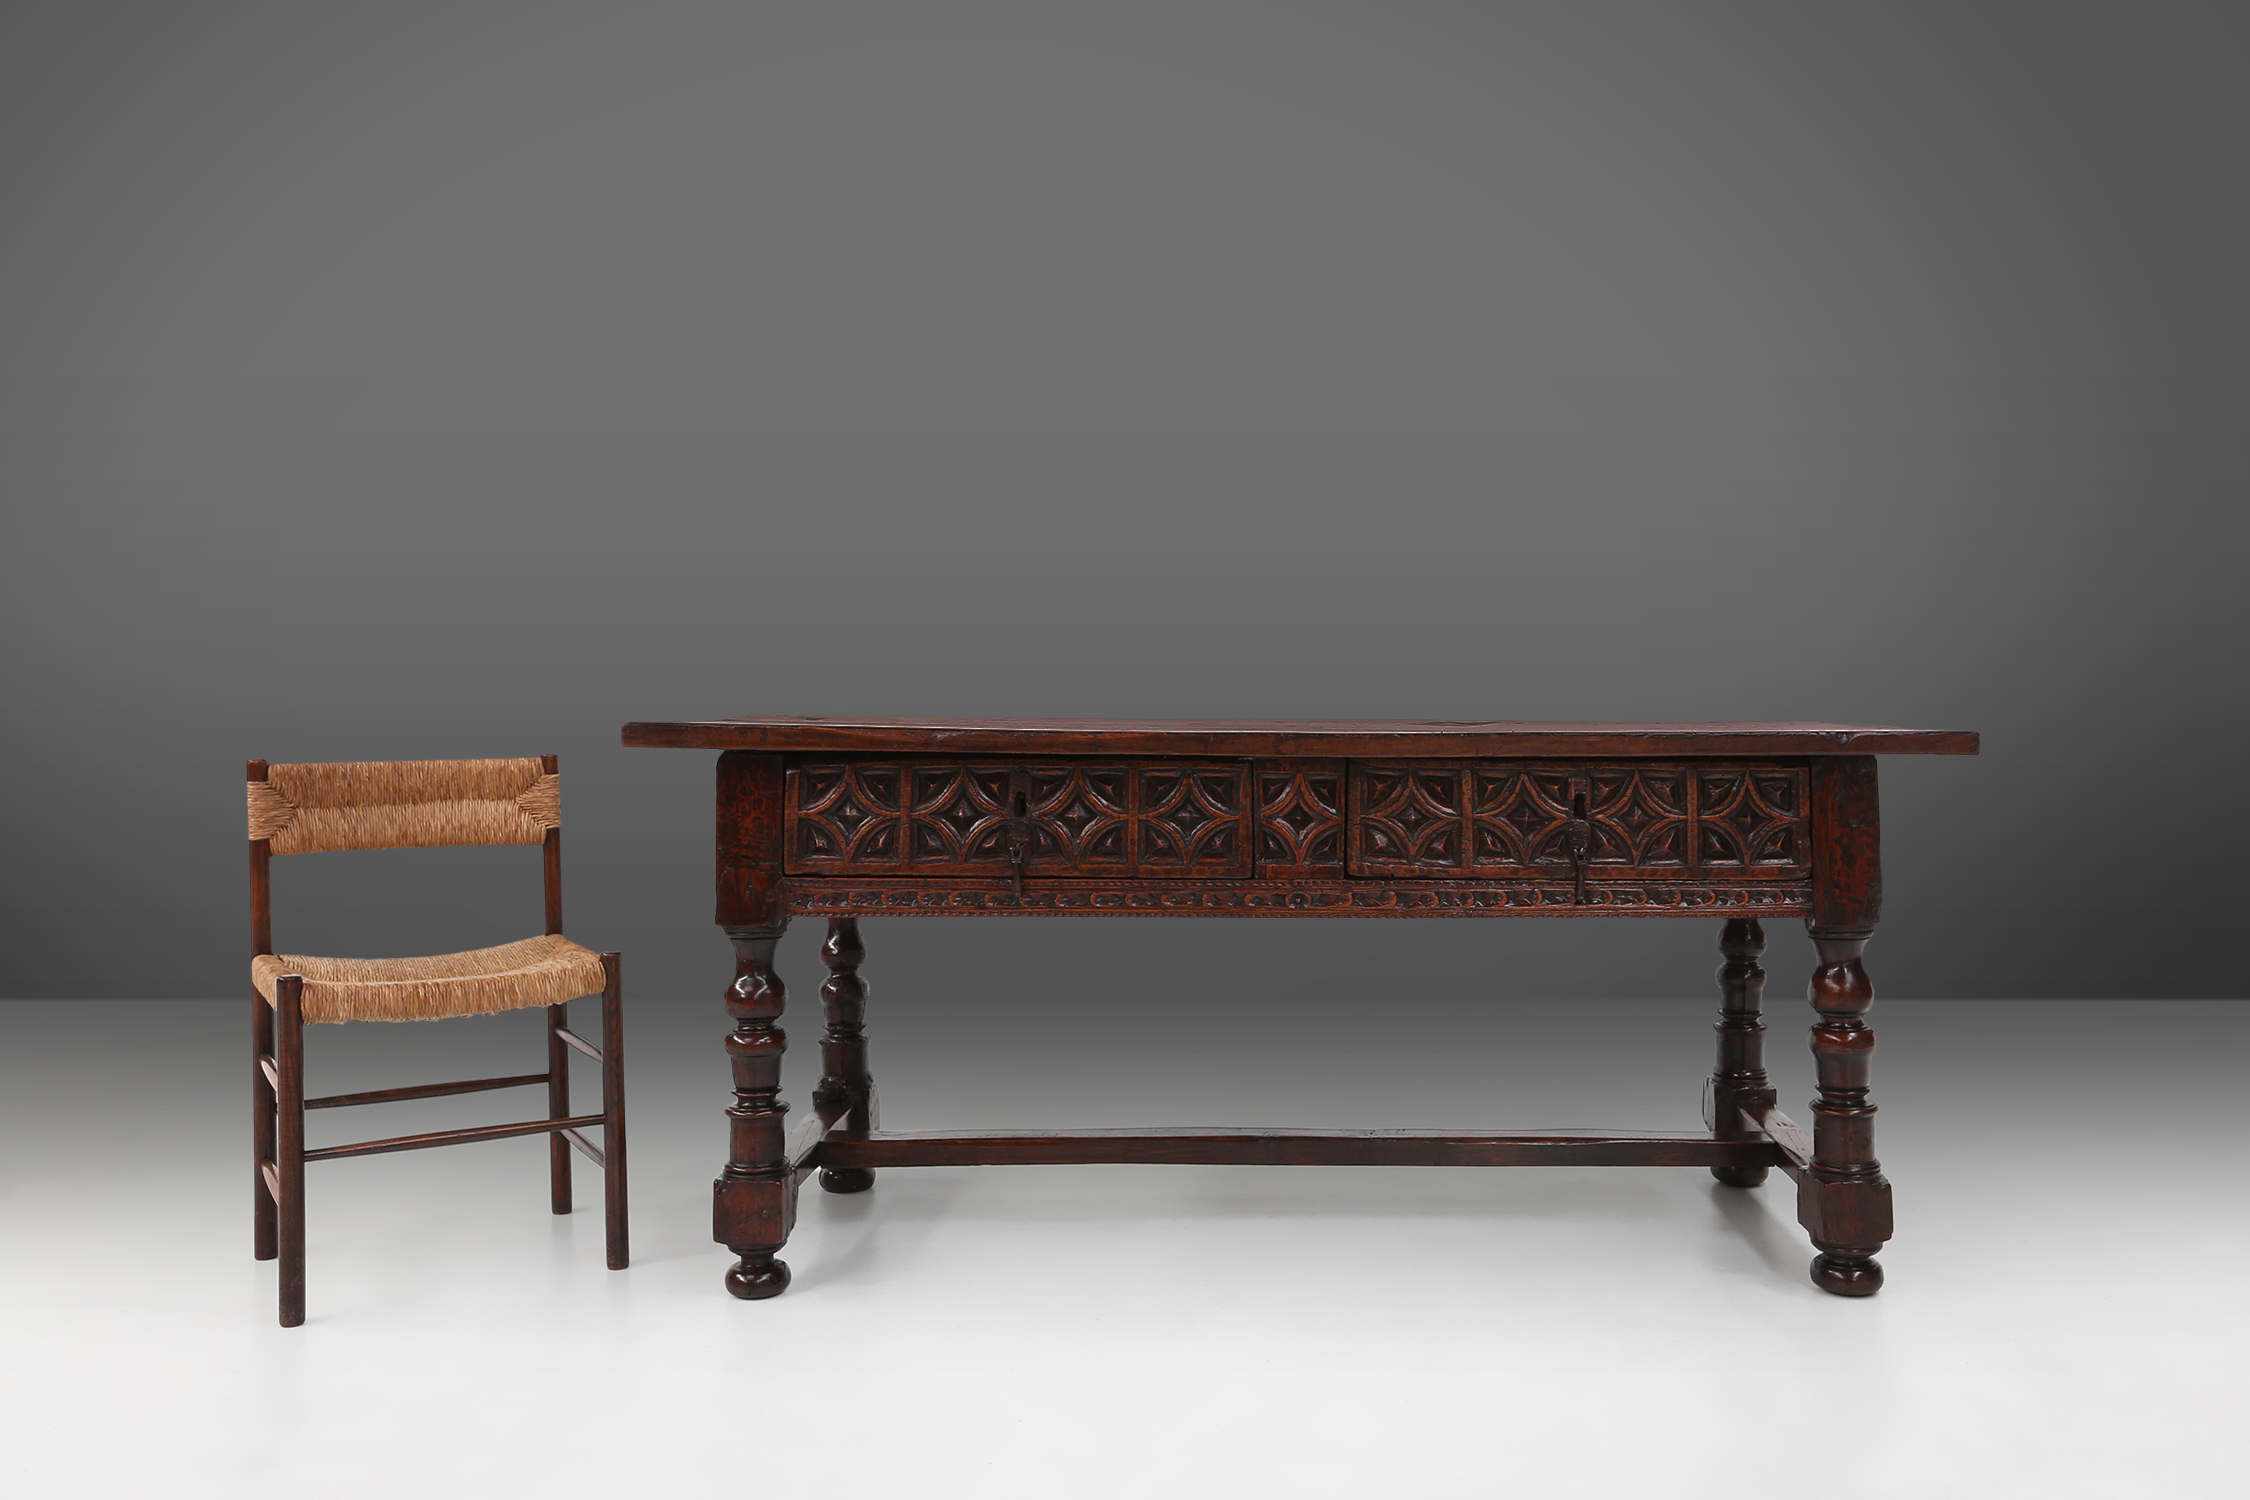 Impressive hand carved console table in oak, Spain, ca. 1550thumbnail